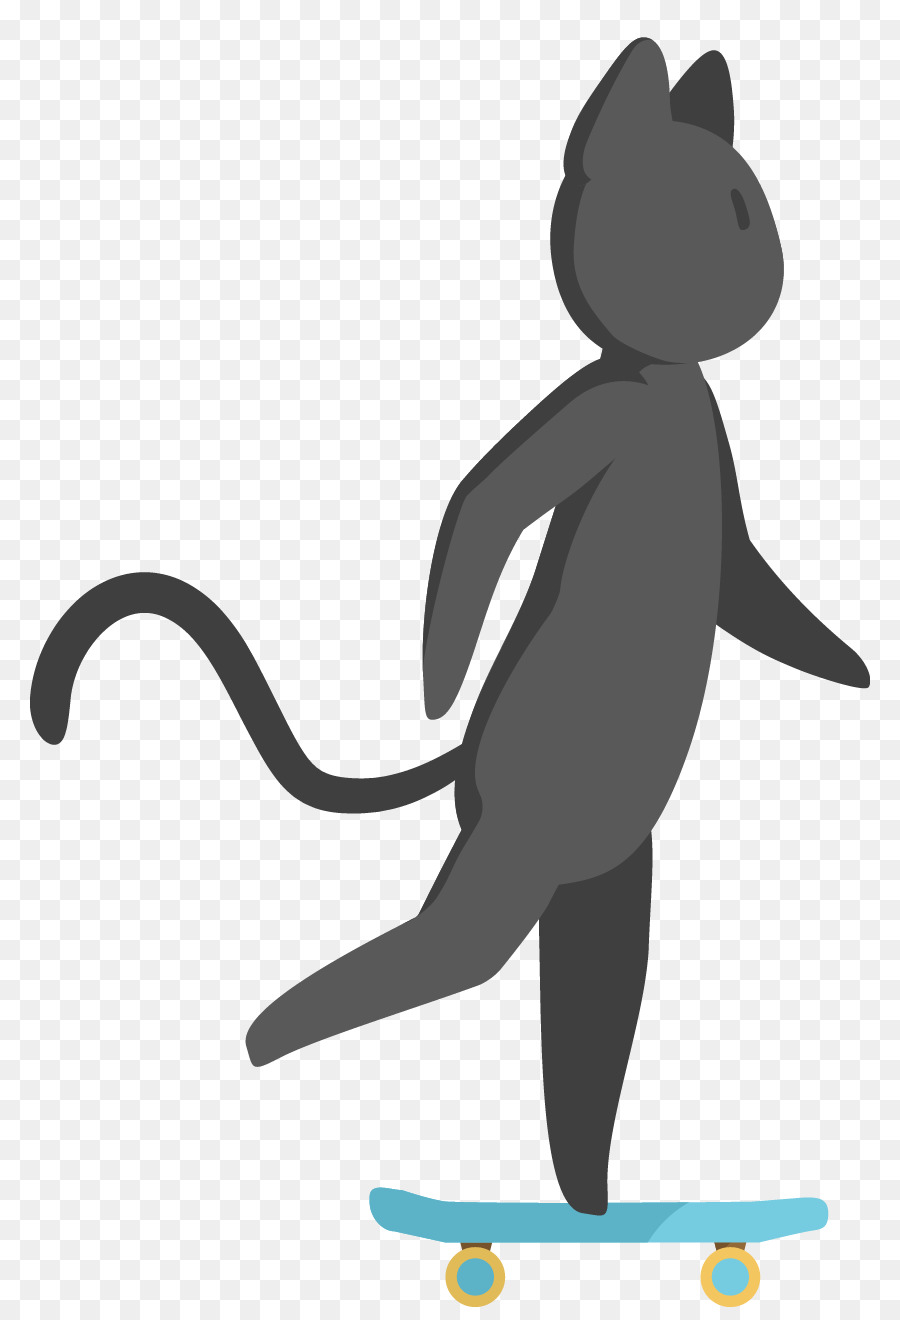 Cat Canidae Dog Silhouette Clip art - Cat png download - 840*1307 - Free Transparent Cat png Download.